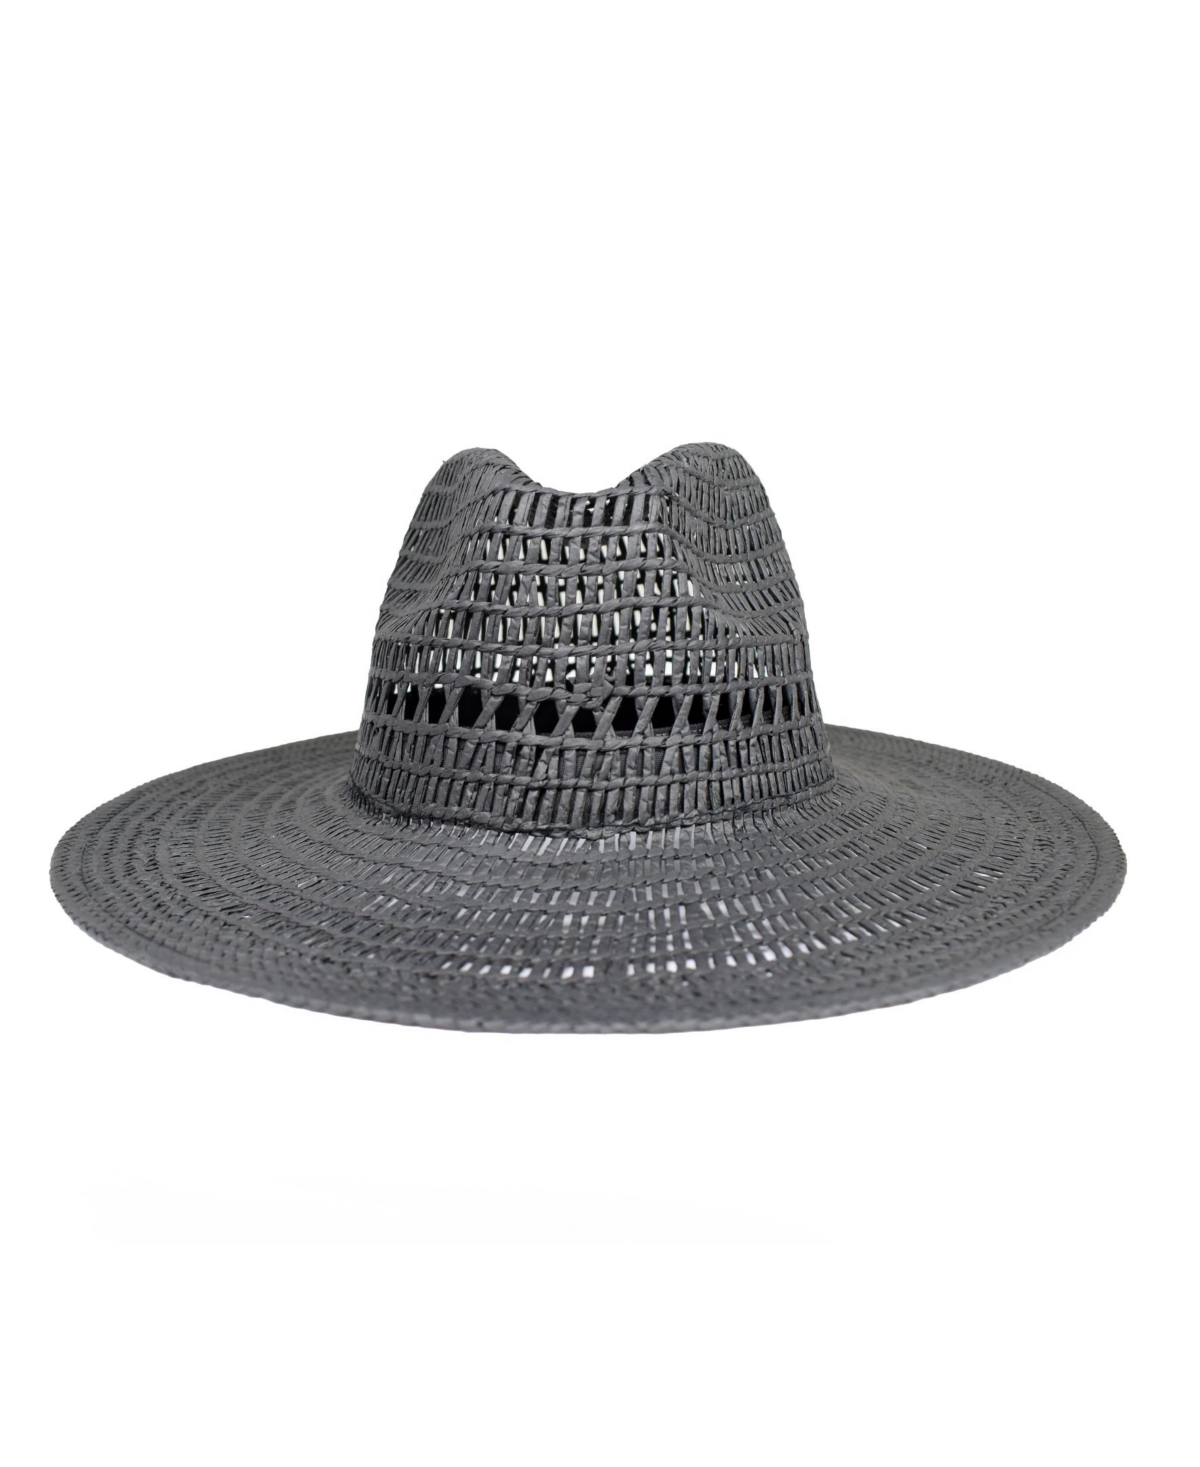 Marcus Adler Women's Straw Hat With Cut Out Detail In Black